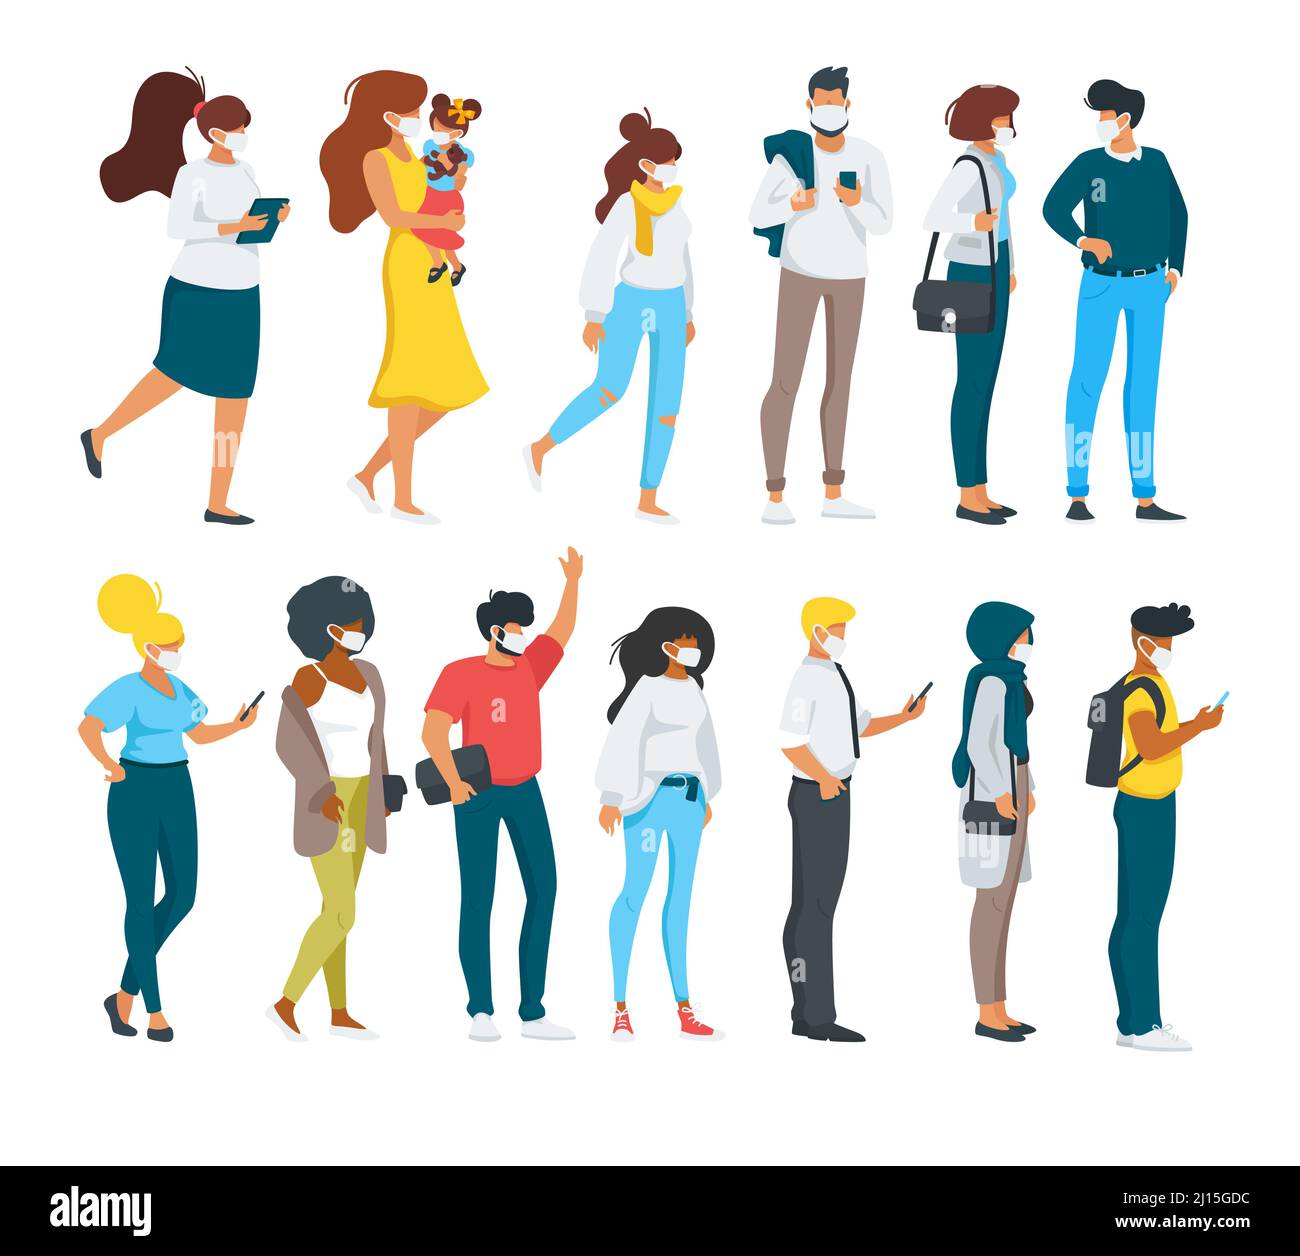 Vector flat style set of standing people Stock Vector